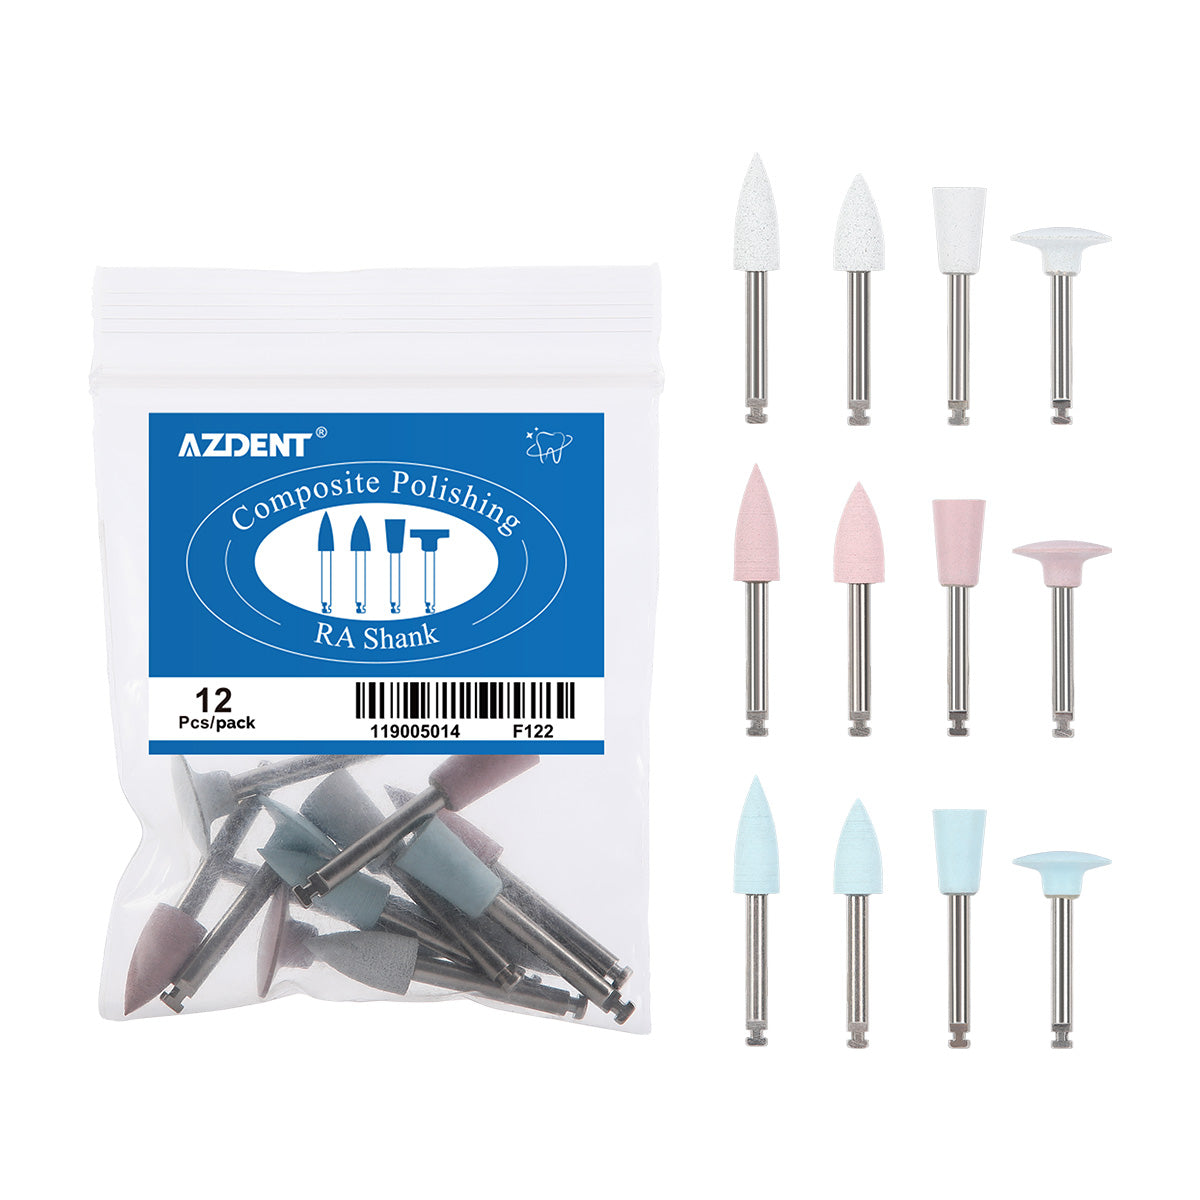 Dental Silicone Polishing For Composite /Natural Teeth/ Porcelain 12Pcs/pack - pairaydental.com